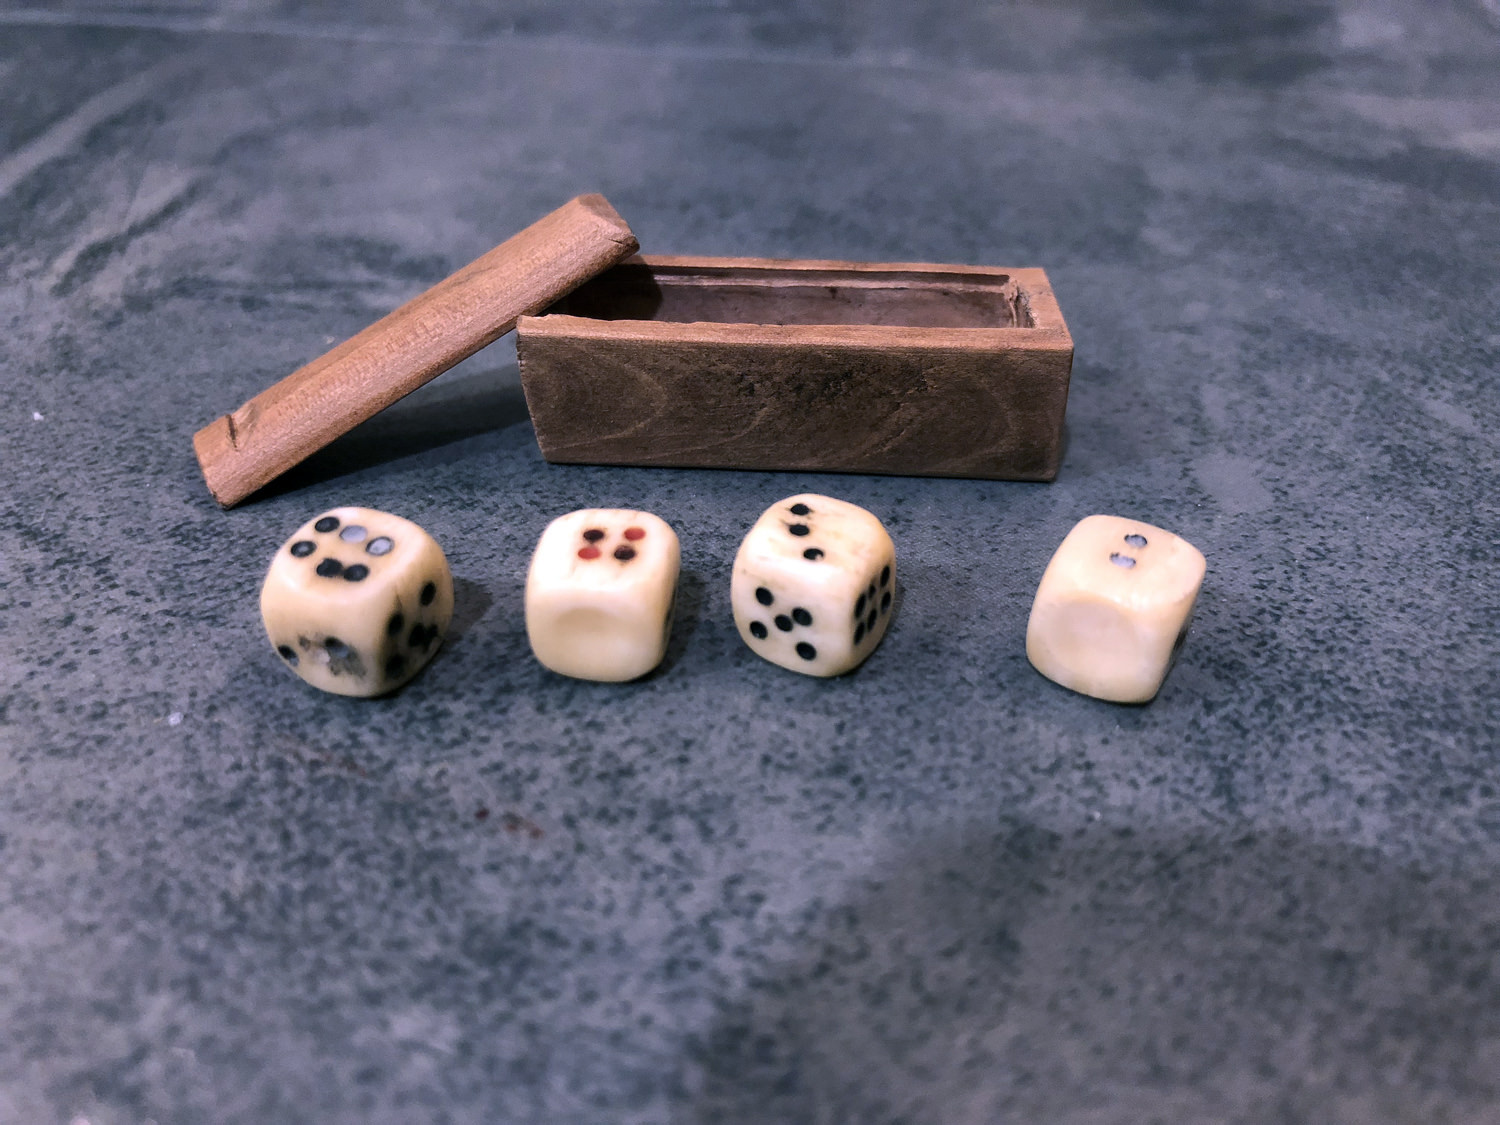 Hobby – Collecting Vague Memorabilia That Tells a Memoir – Prisoner’s Dice Manufactured from Human Teeth and Civil Battle Artifacts